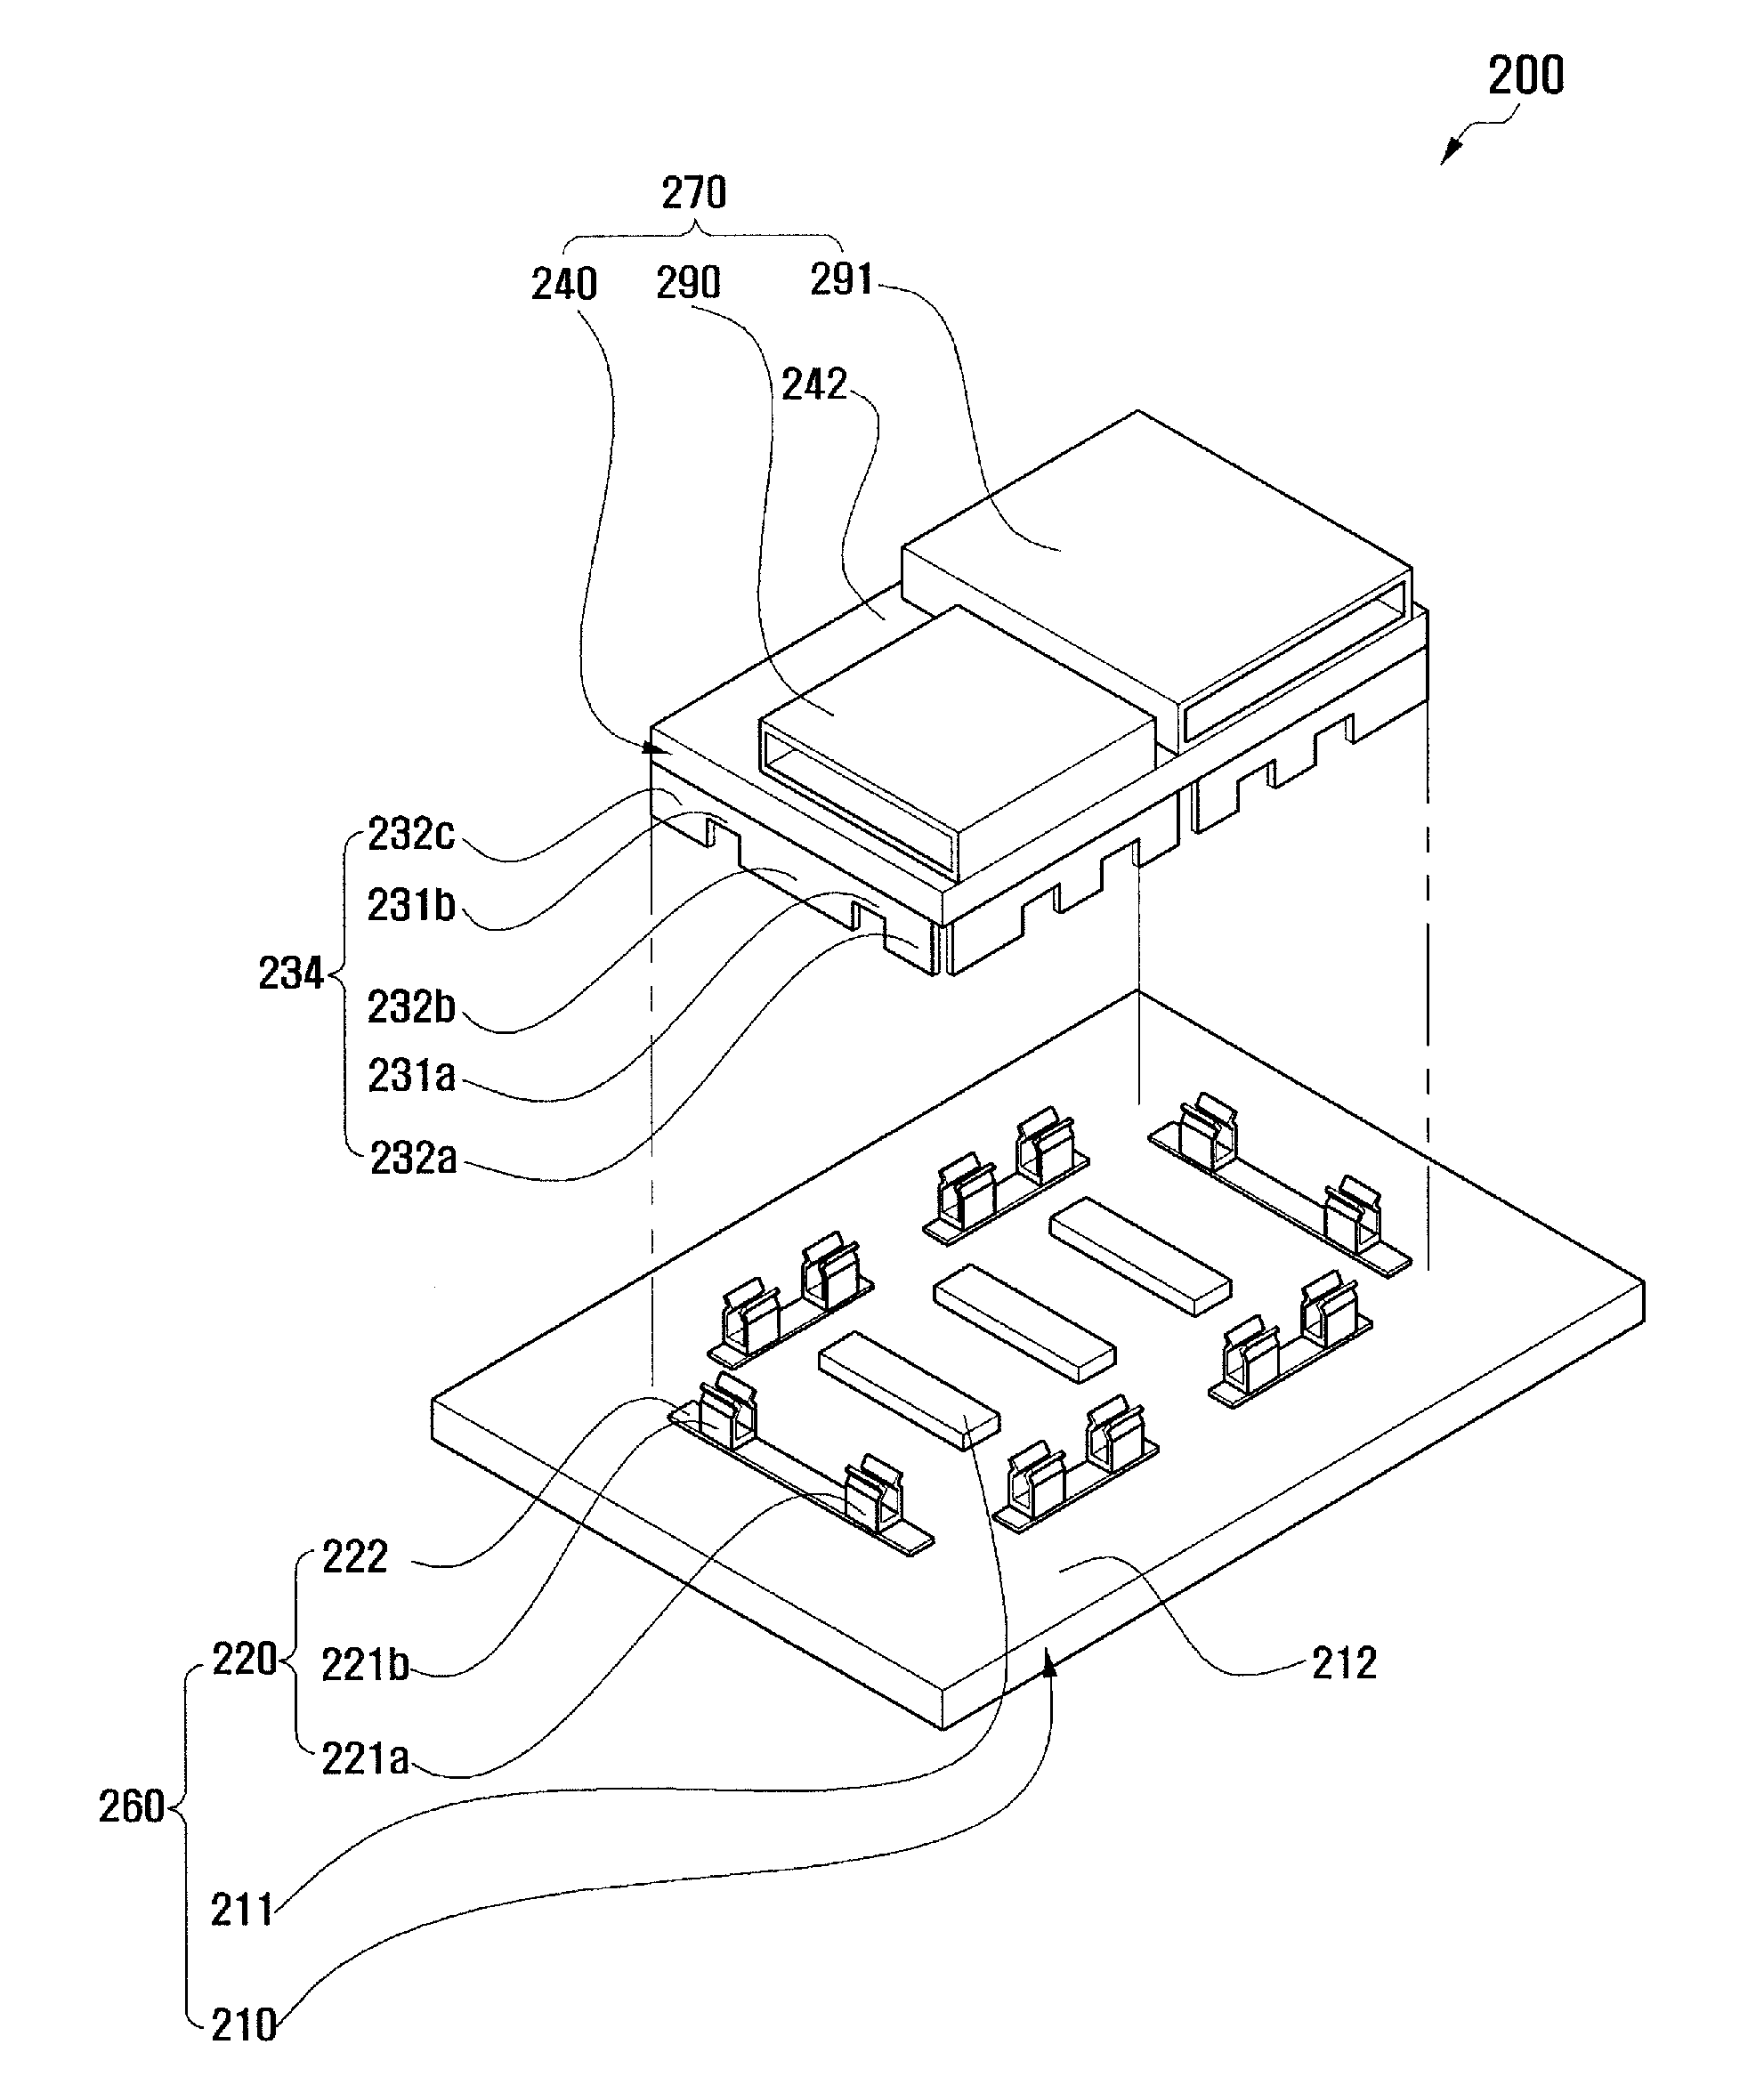 Structure for stacking printed board assemblies in electronic device